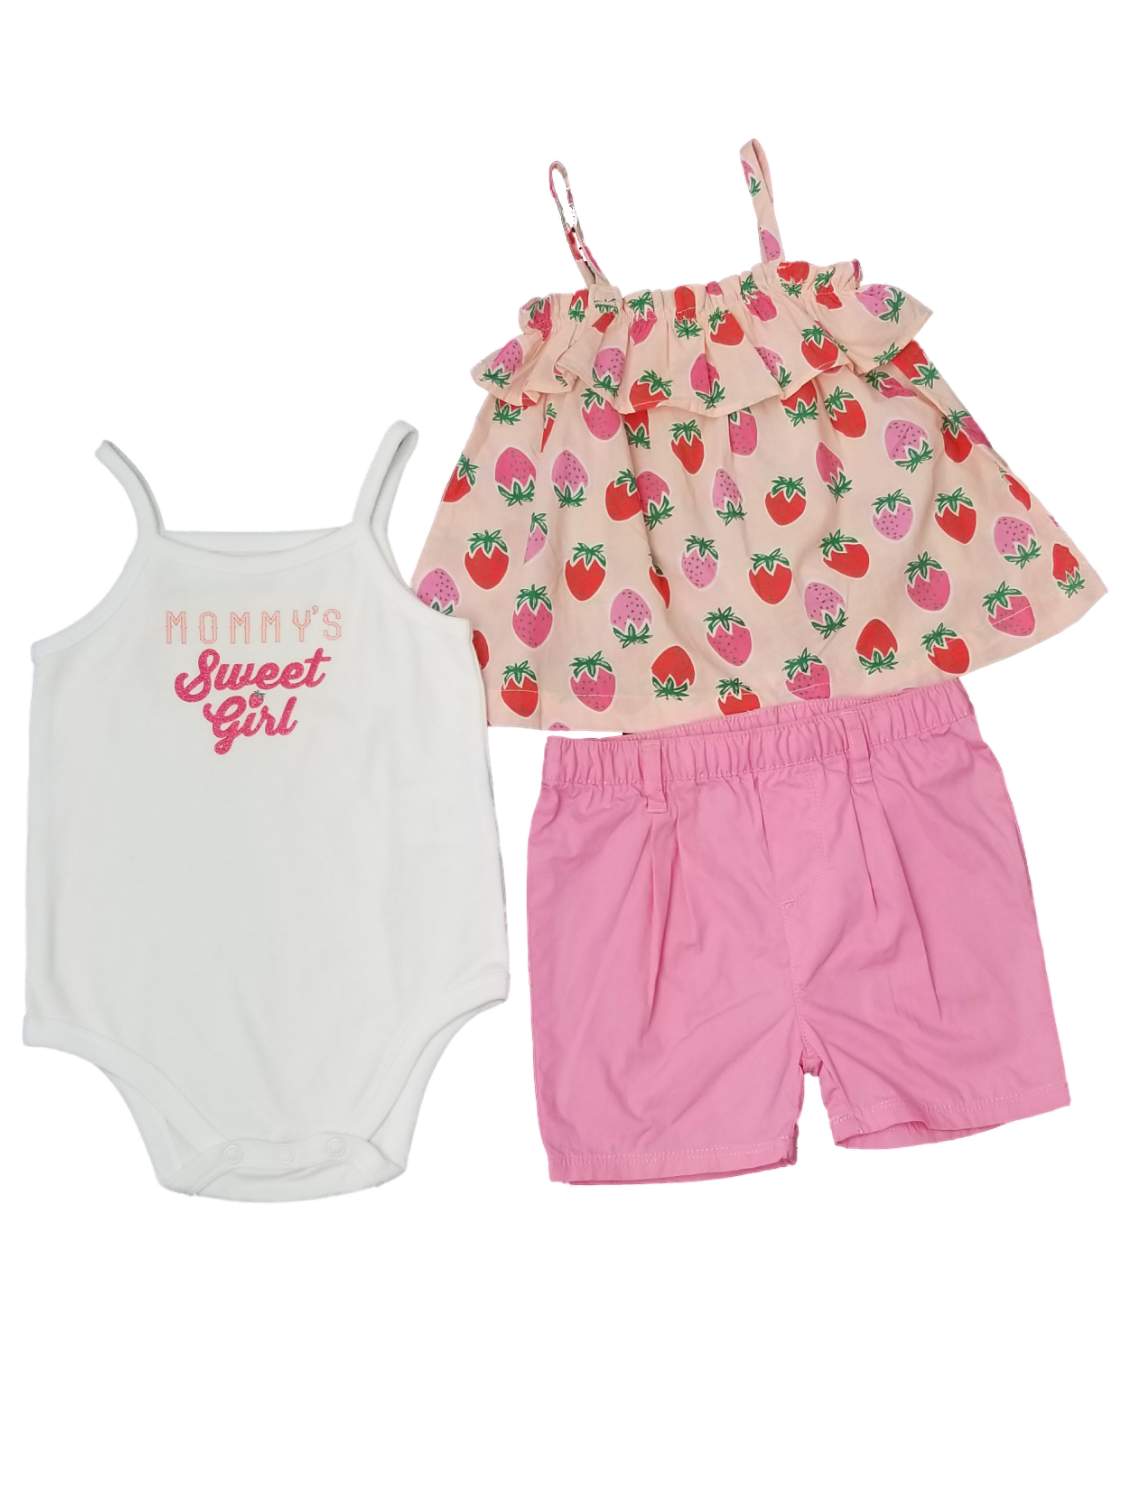 Little Wonders Infant Girls Baby Pink Strawberry Shirt  Sweet Girl Body Suit Outfit Set